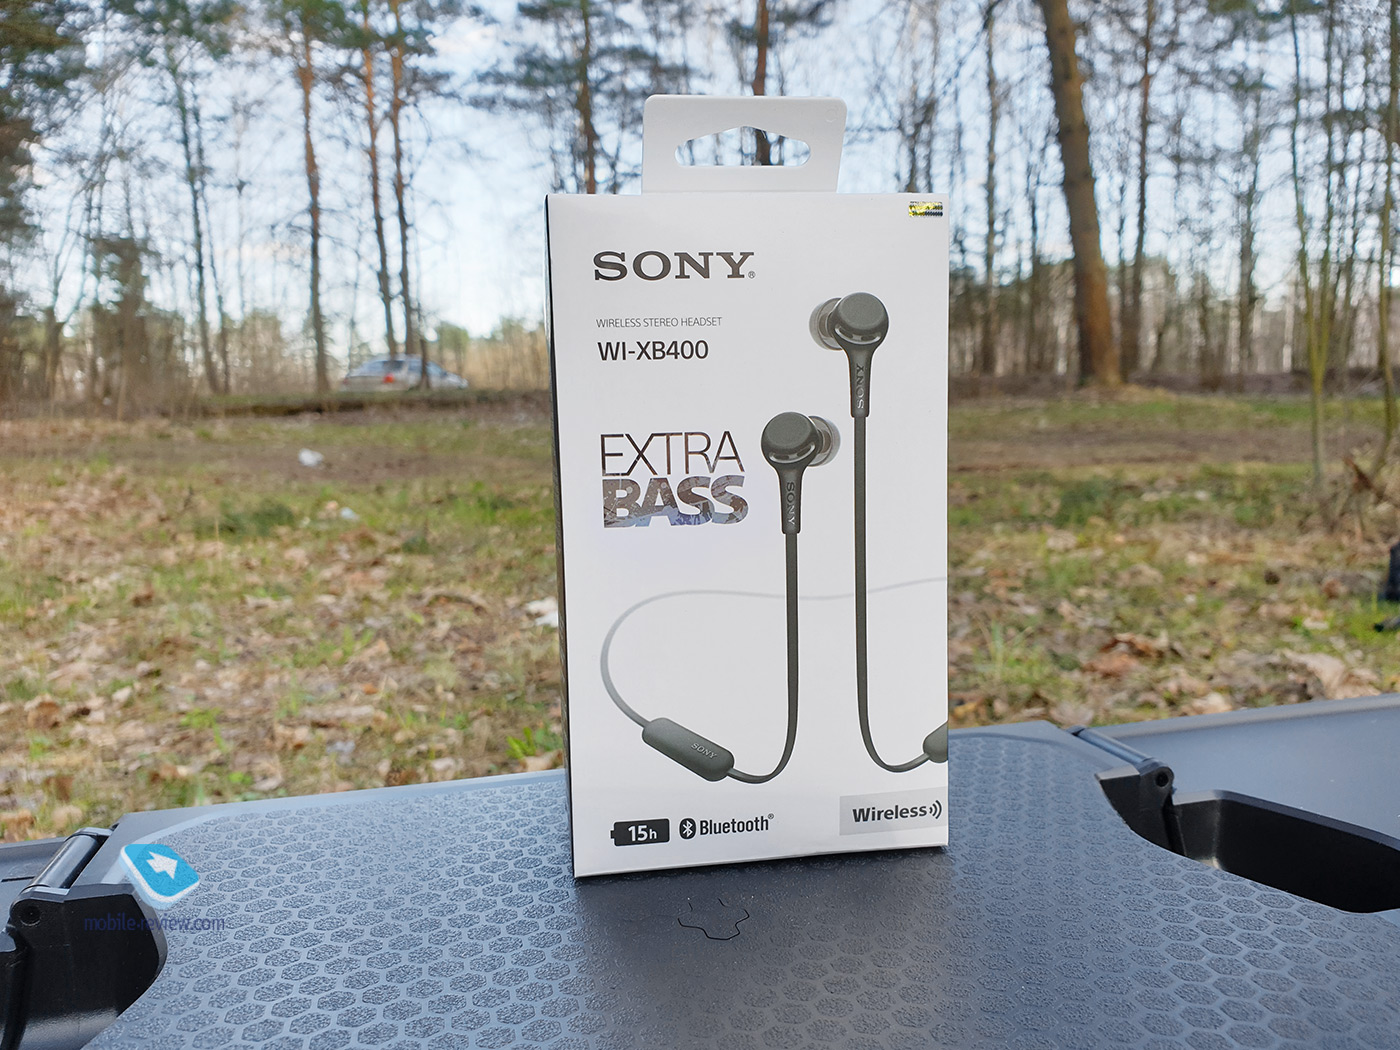 Pro Xperia 5 and 3 pairs of affordable Sony headphones